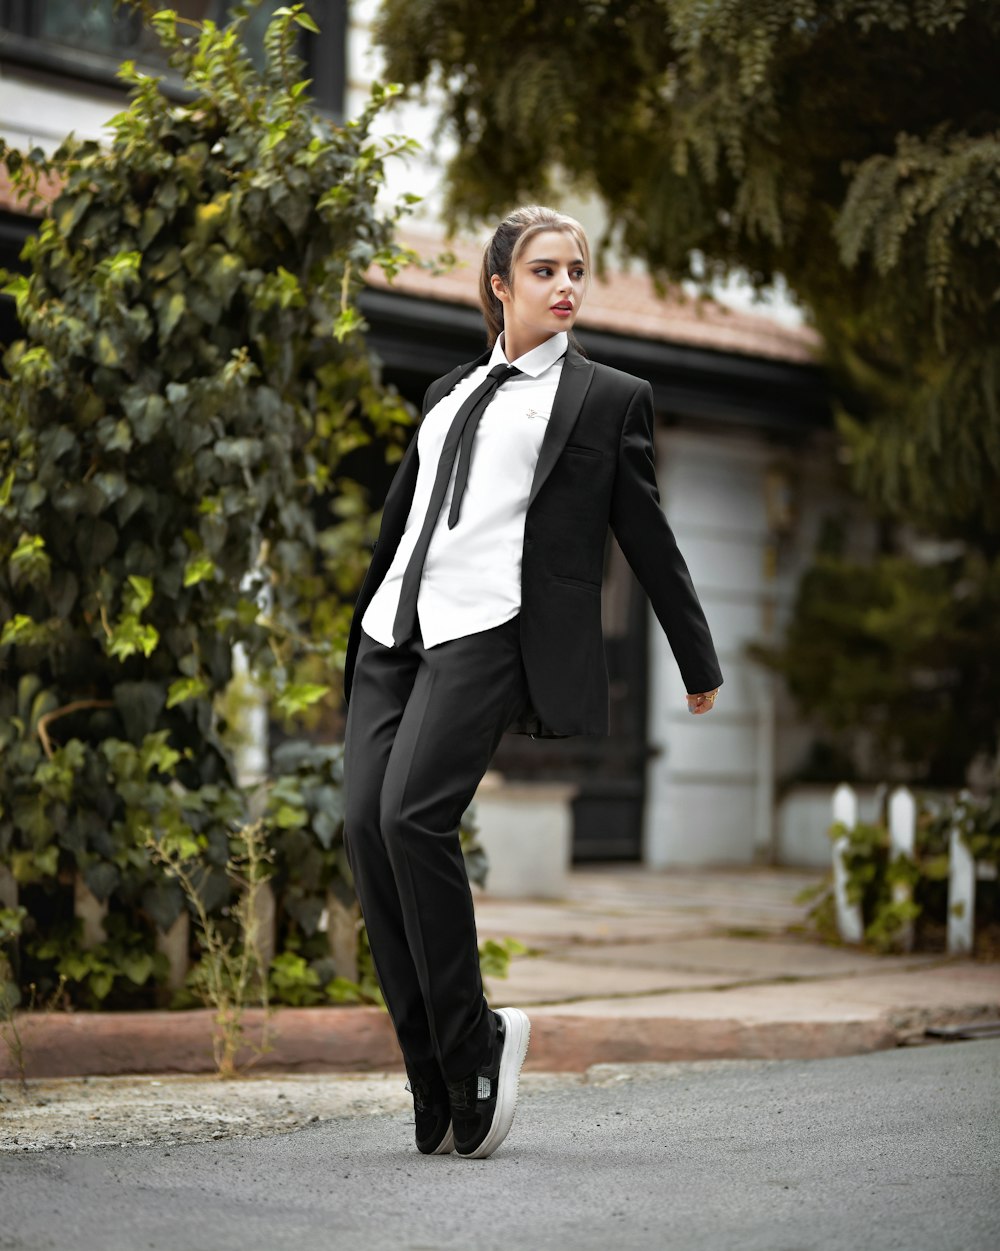 a woman in a suit is walking down the street